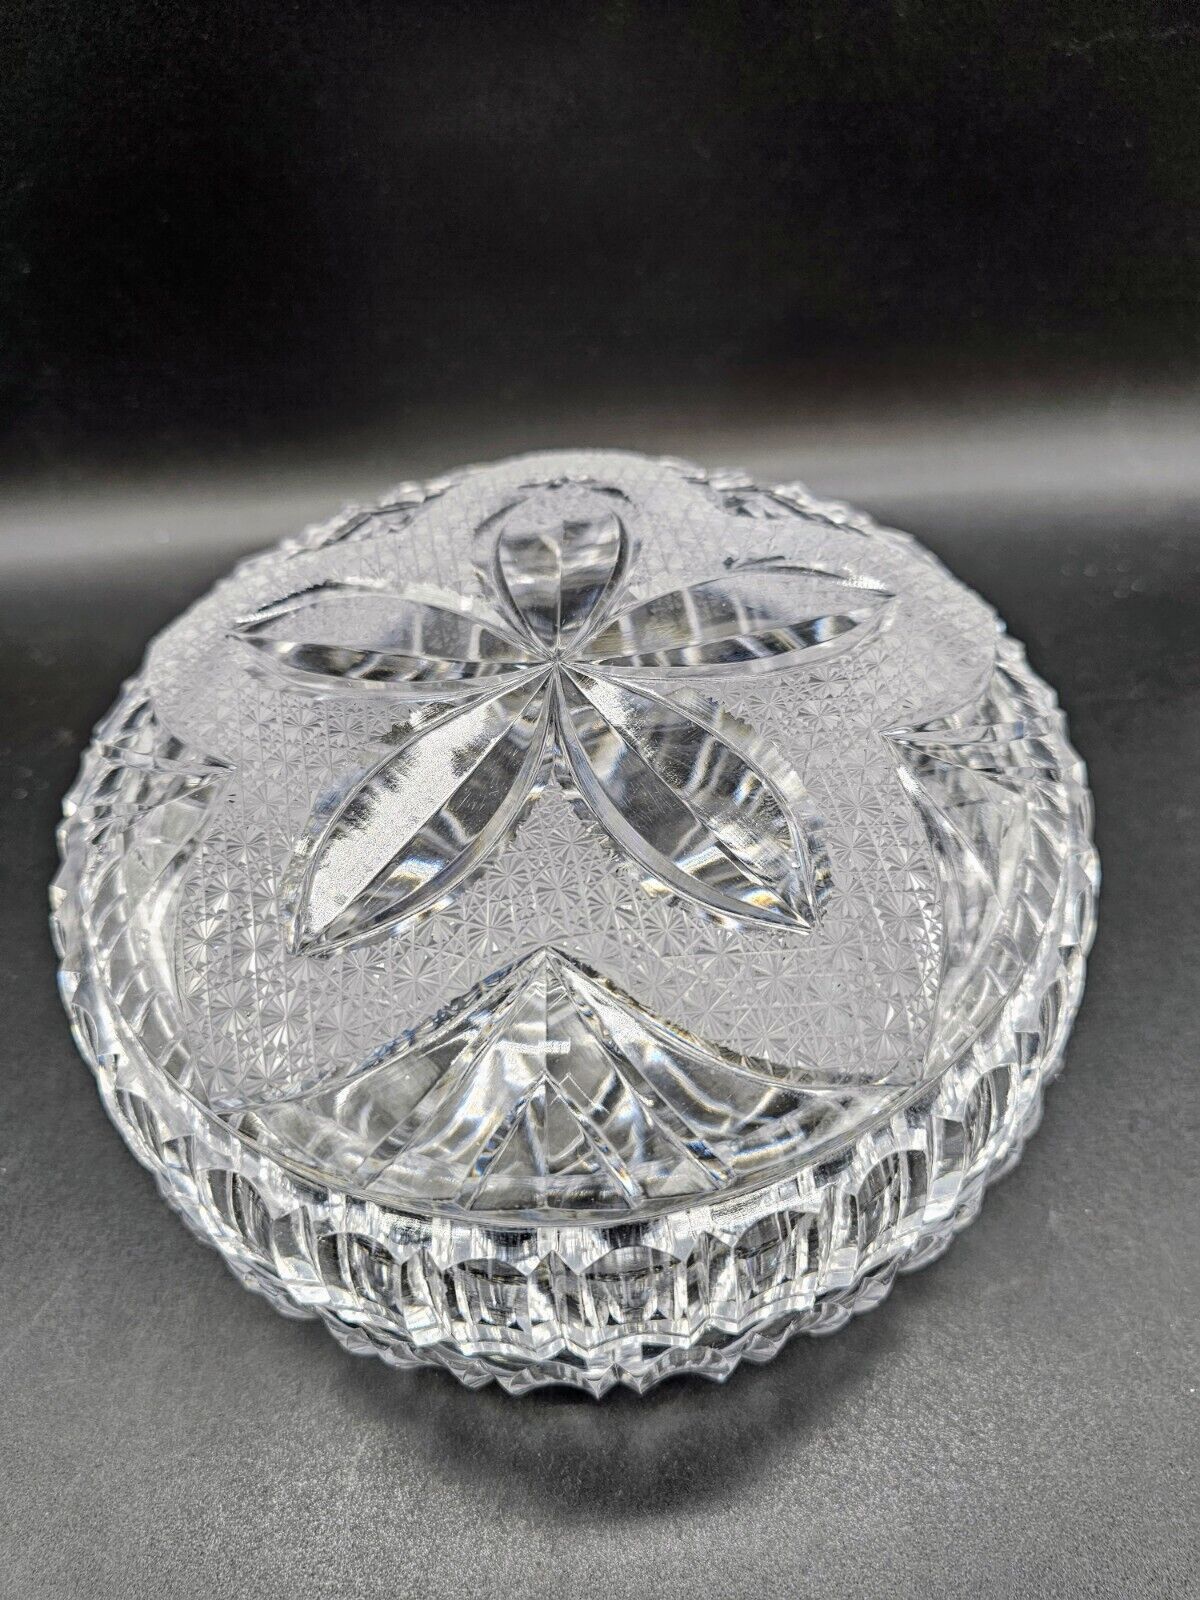 Gorgeous Cut Crystal Large Round Crystal Box /Candy/ Vanity Piece Flower Vintage